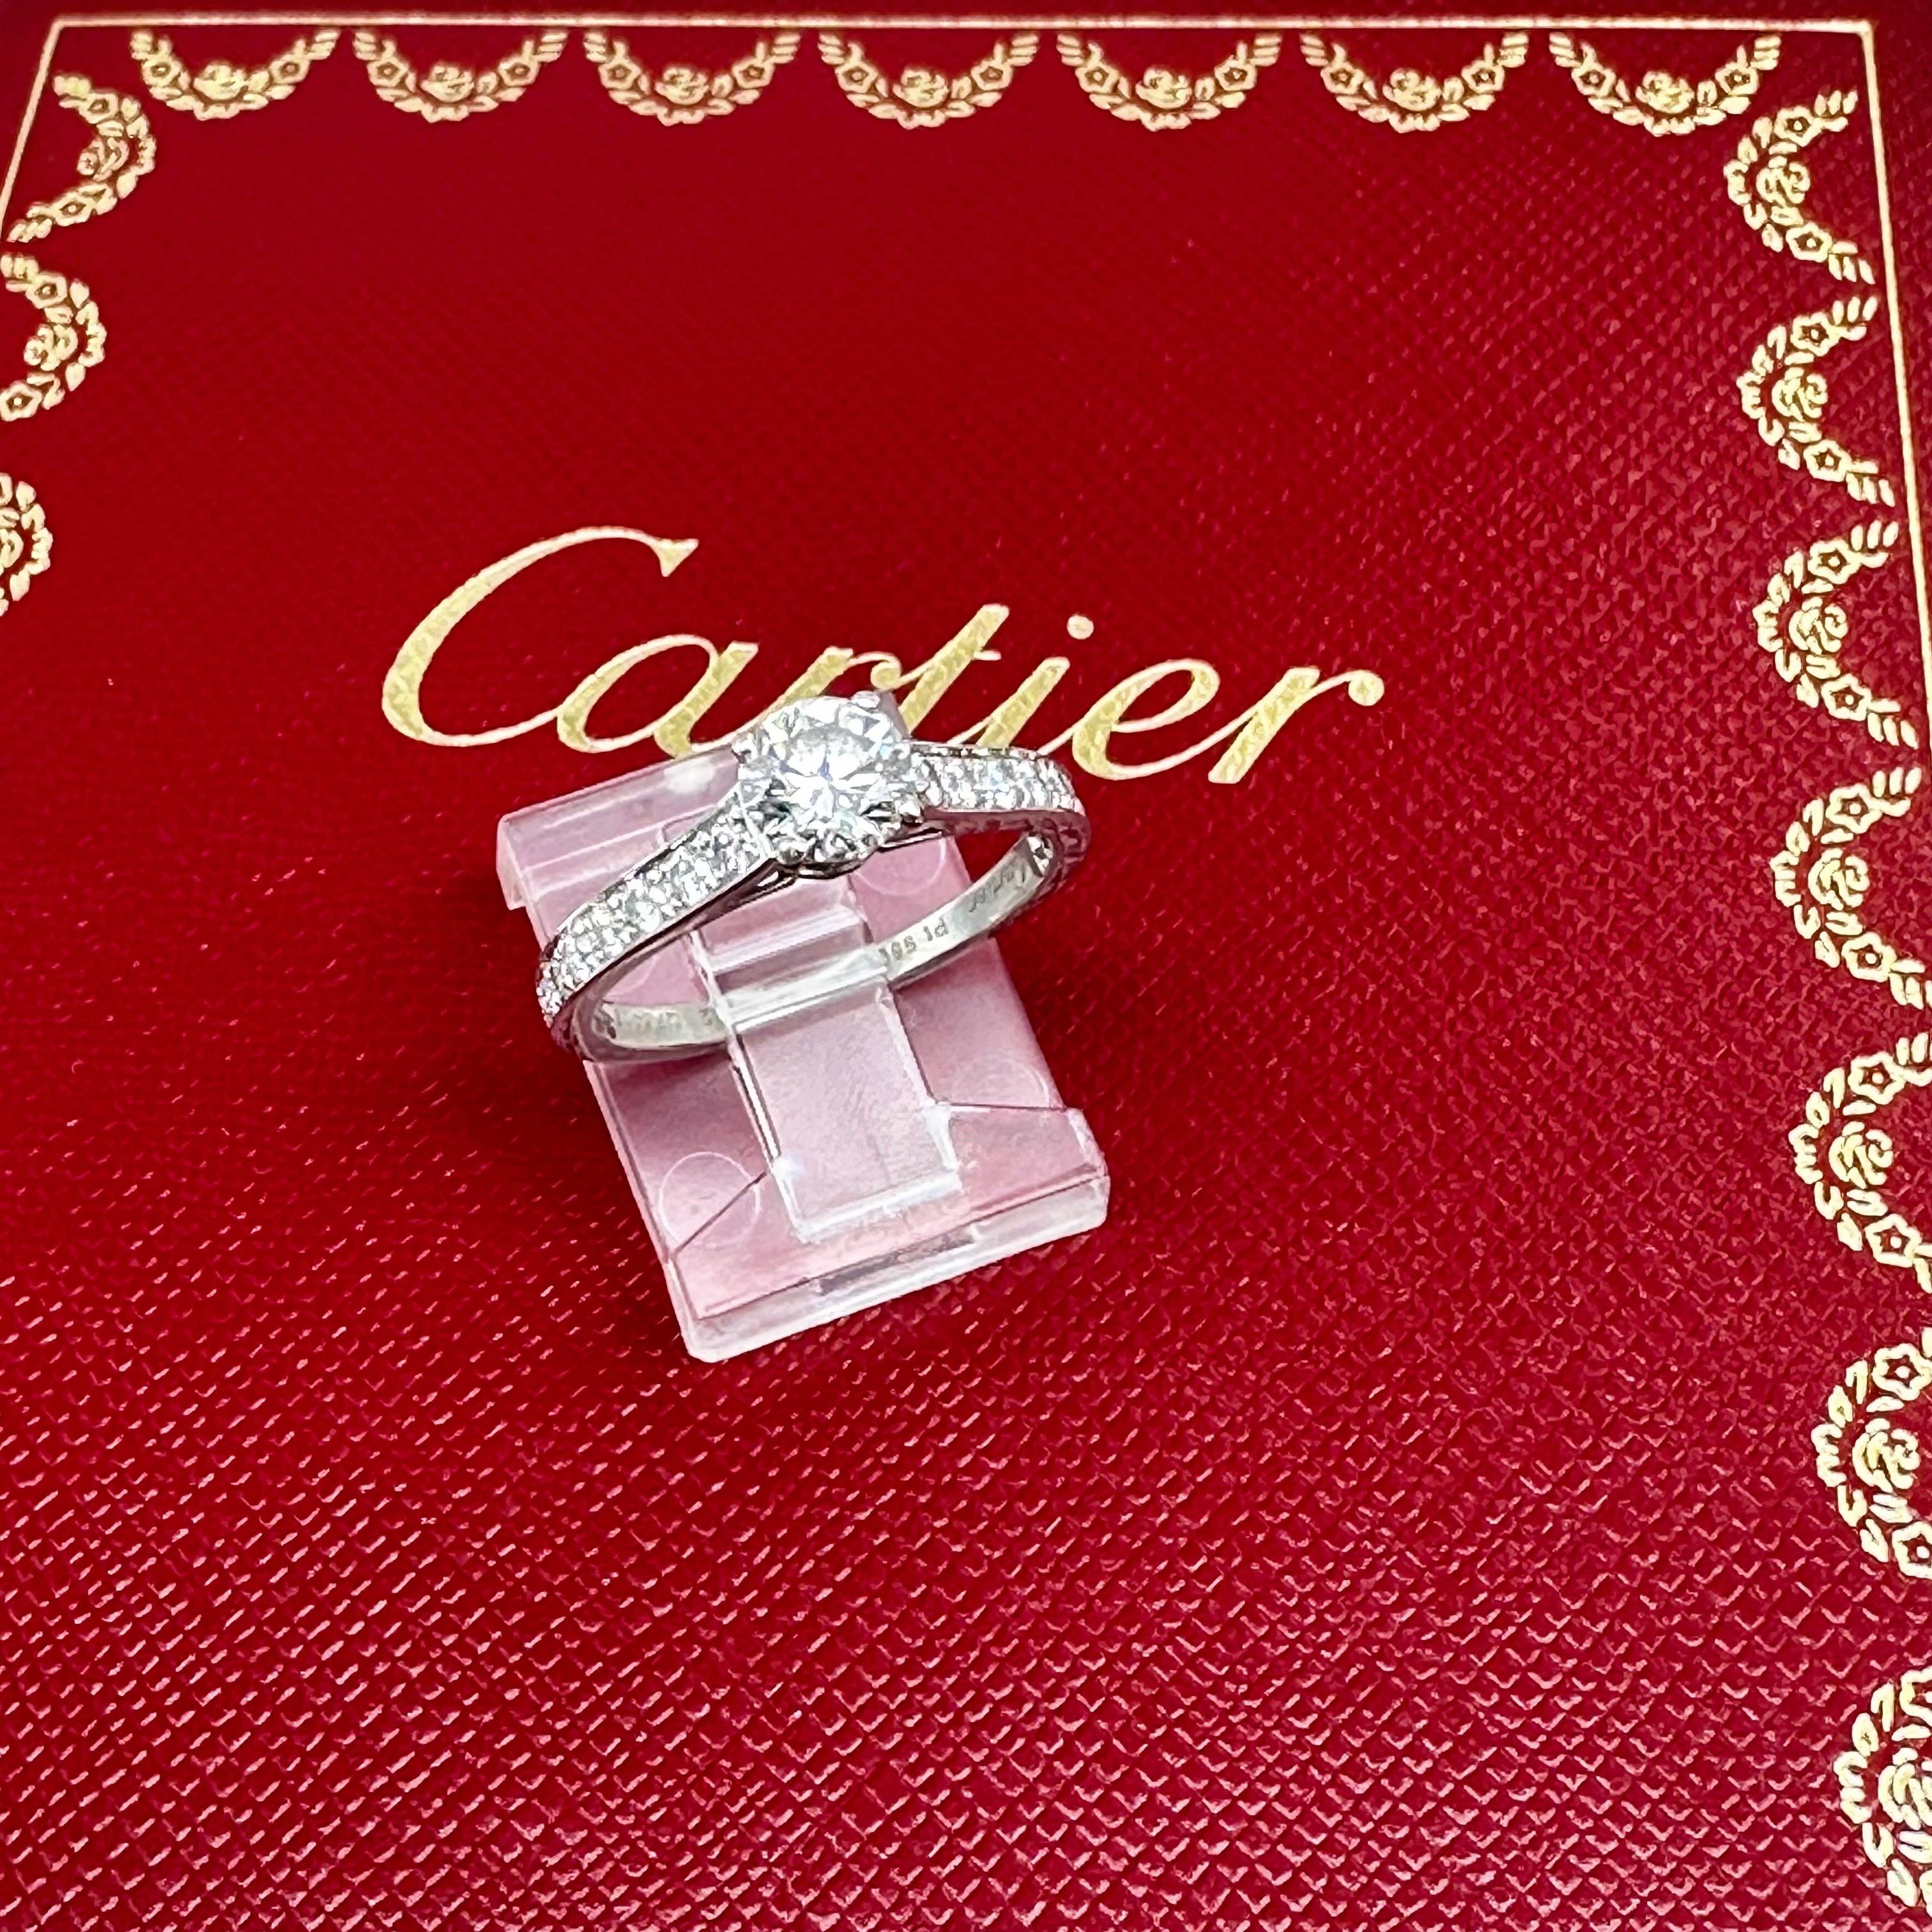 Cartier 1895 Round Diamond 0.88 tcw Engagement Ring in Platinum GIA COA Box For Sale 4